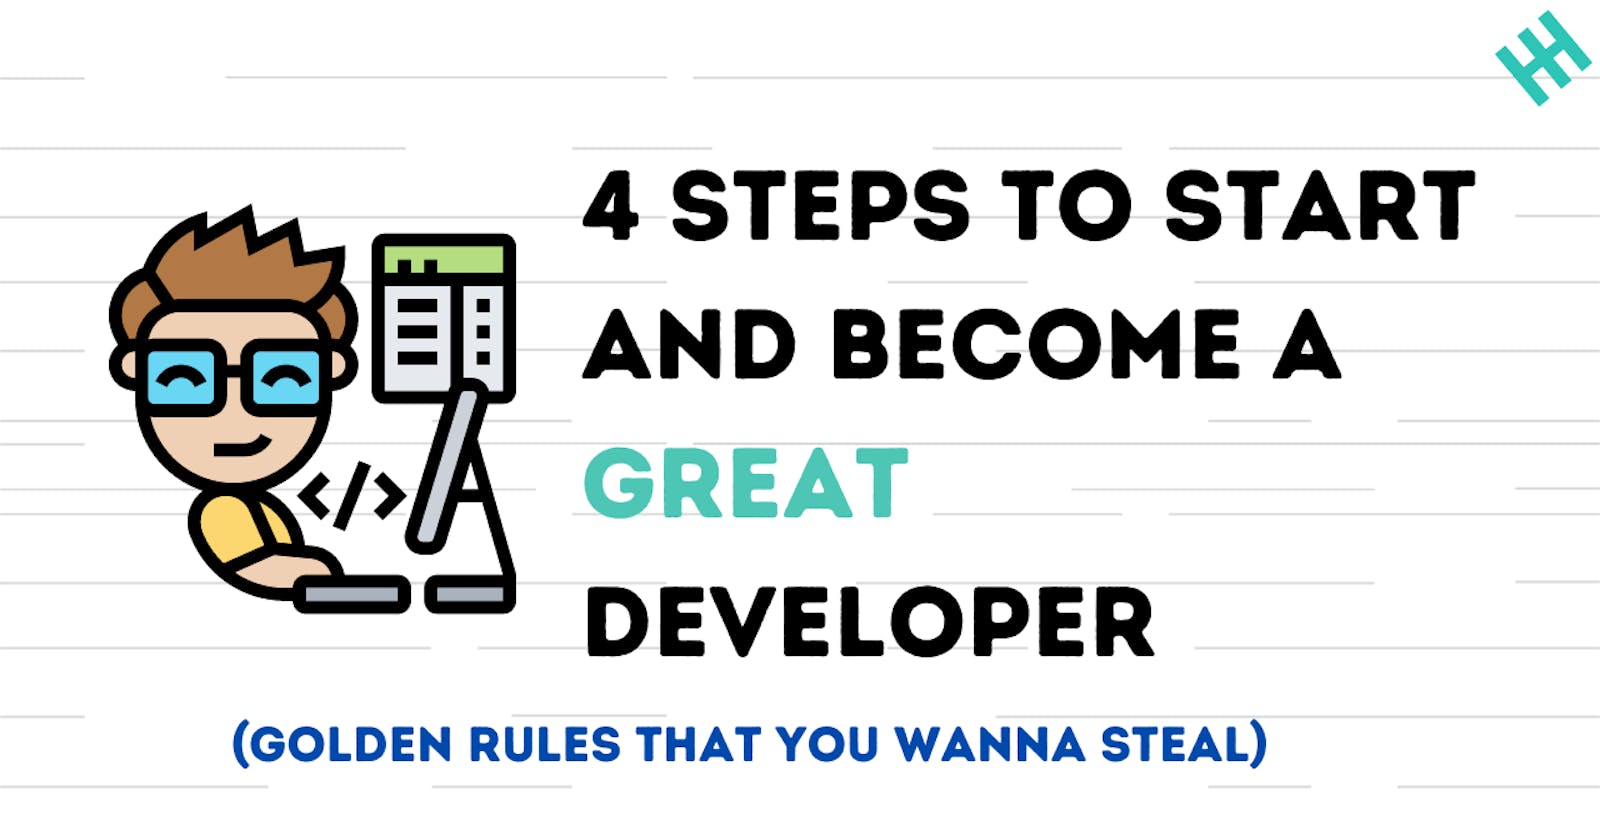 4 Steps To Start And Become A Great Developer (Golden Rules That You Wanna Steal)